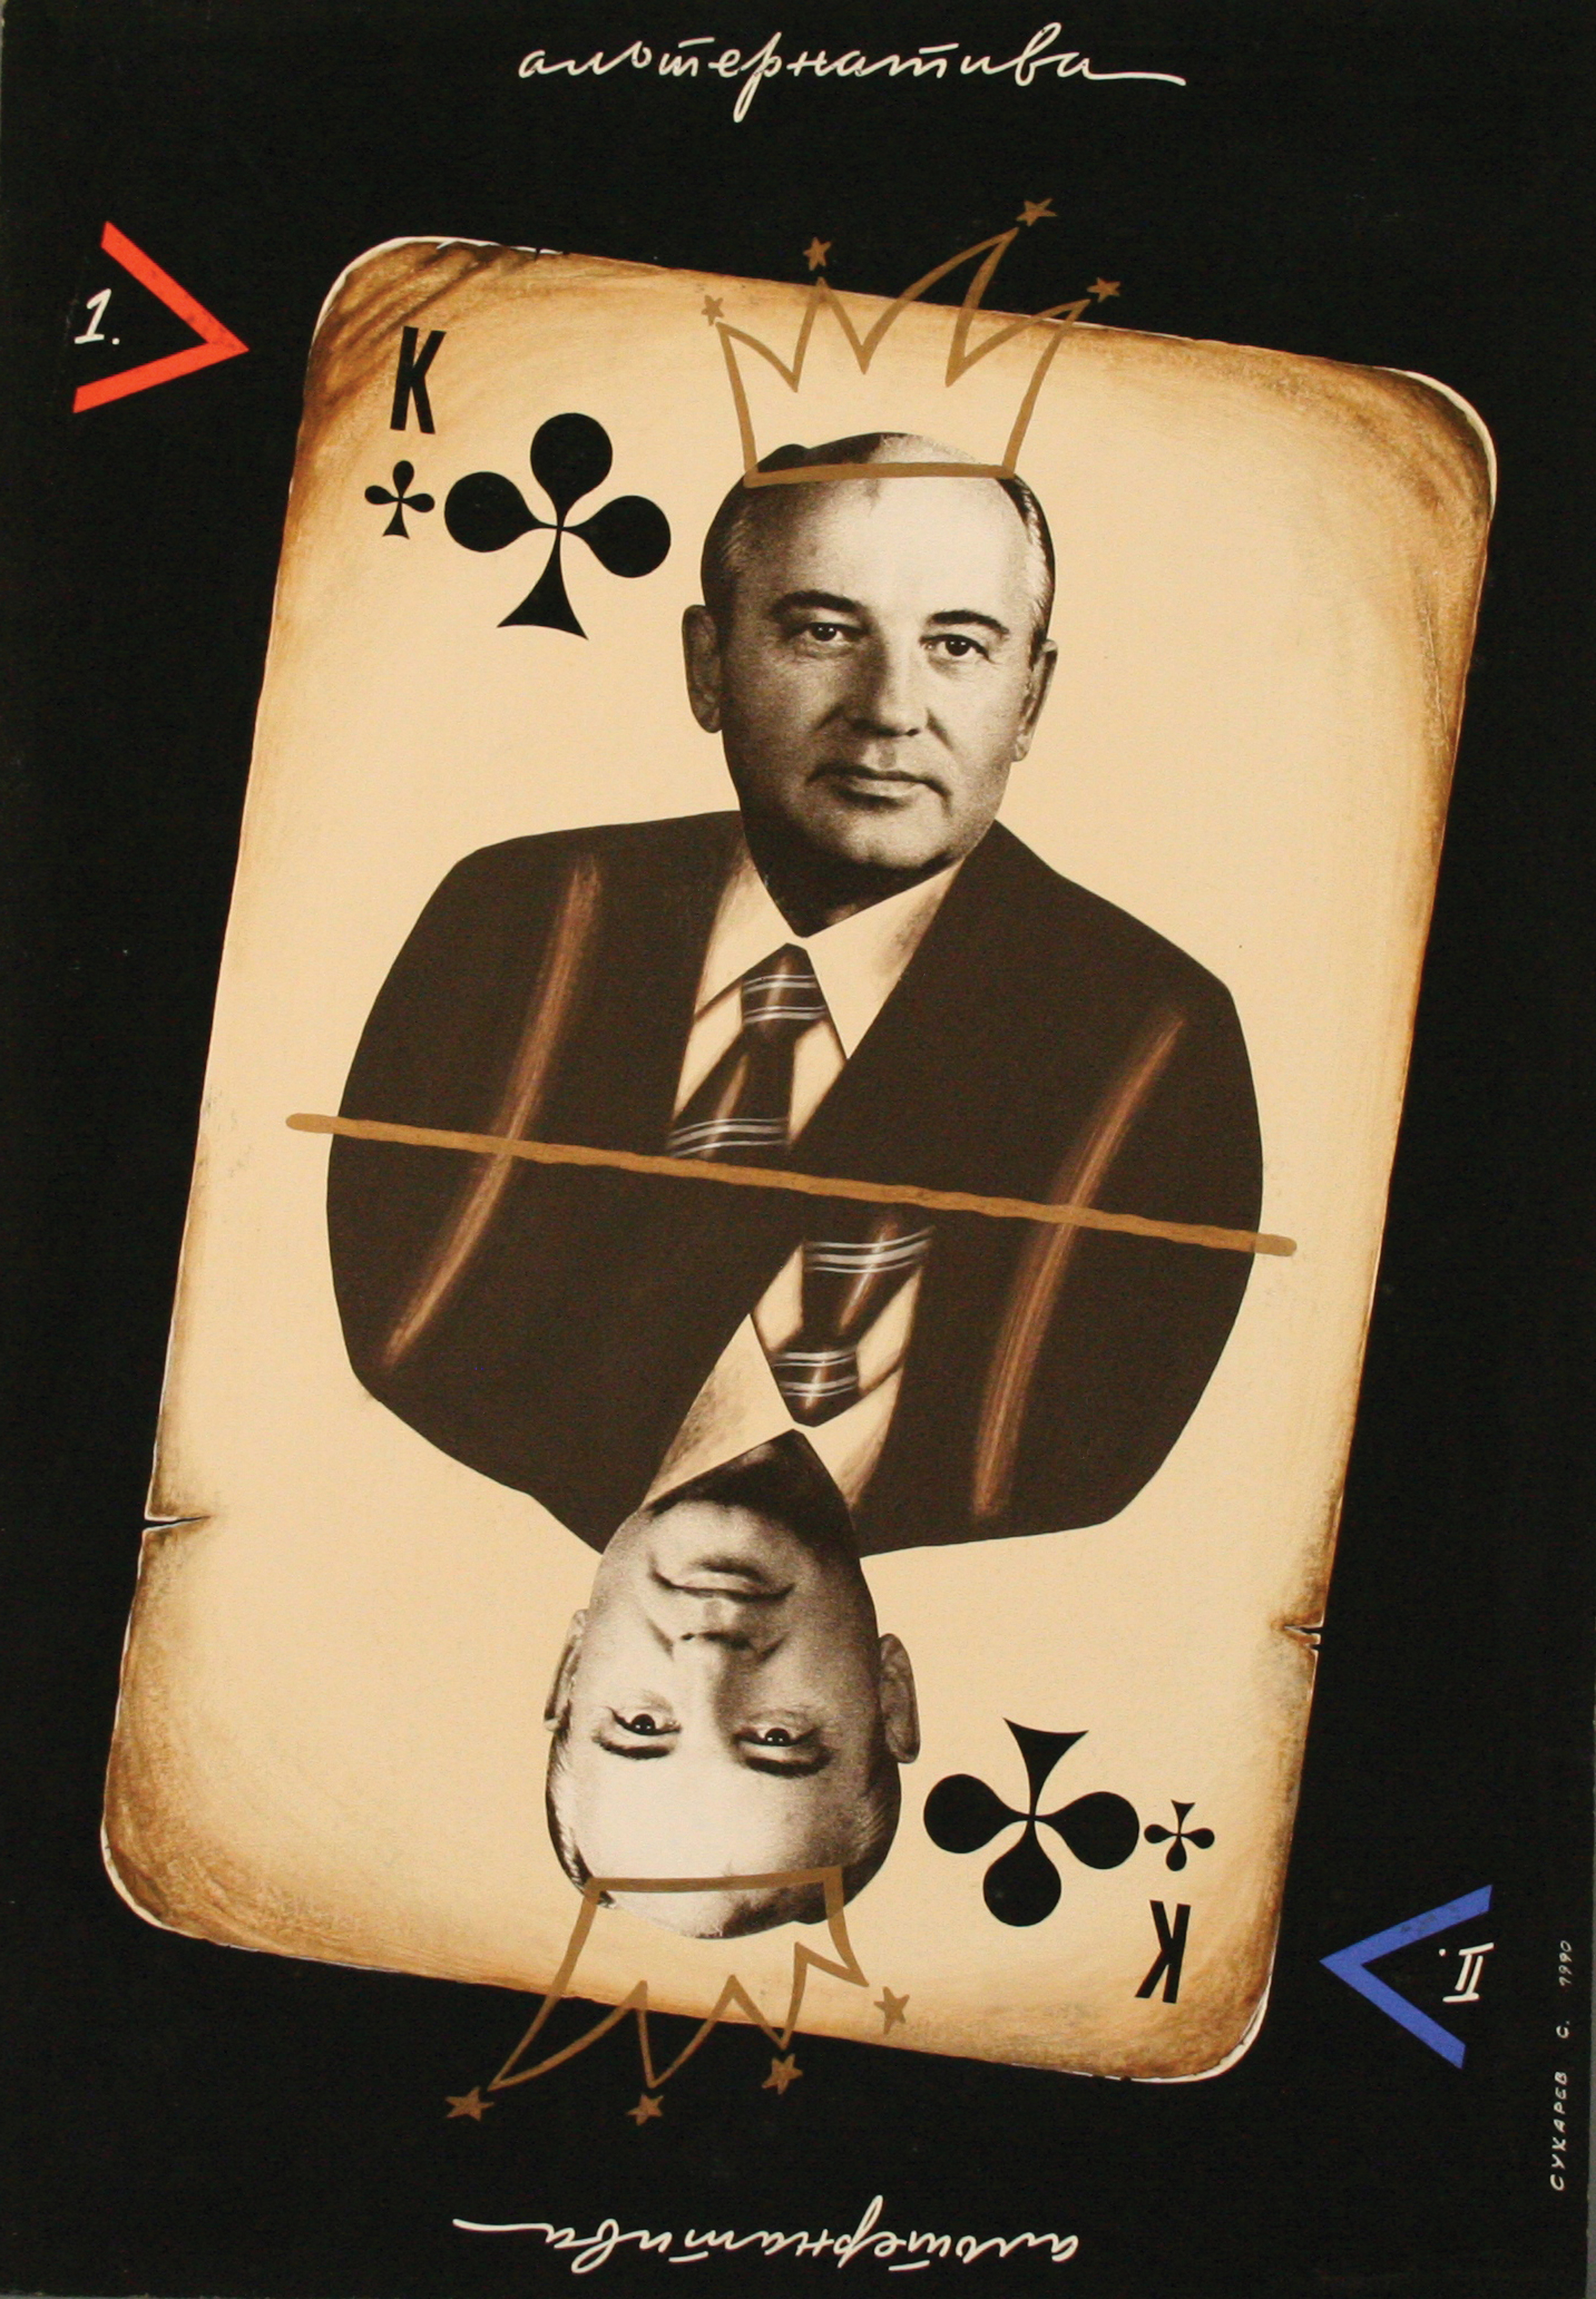 Playing card image by Sergei A. Sukharev, 1990.